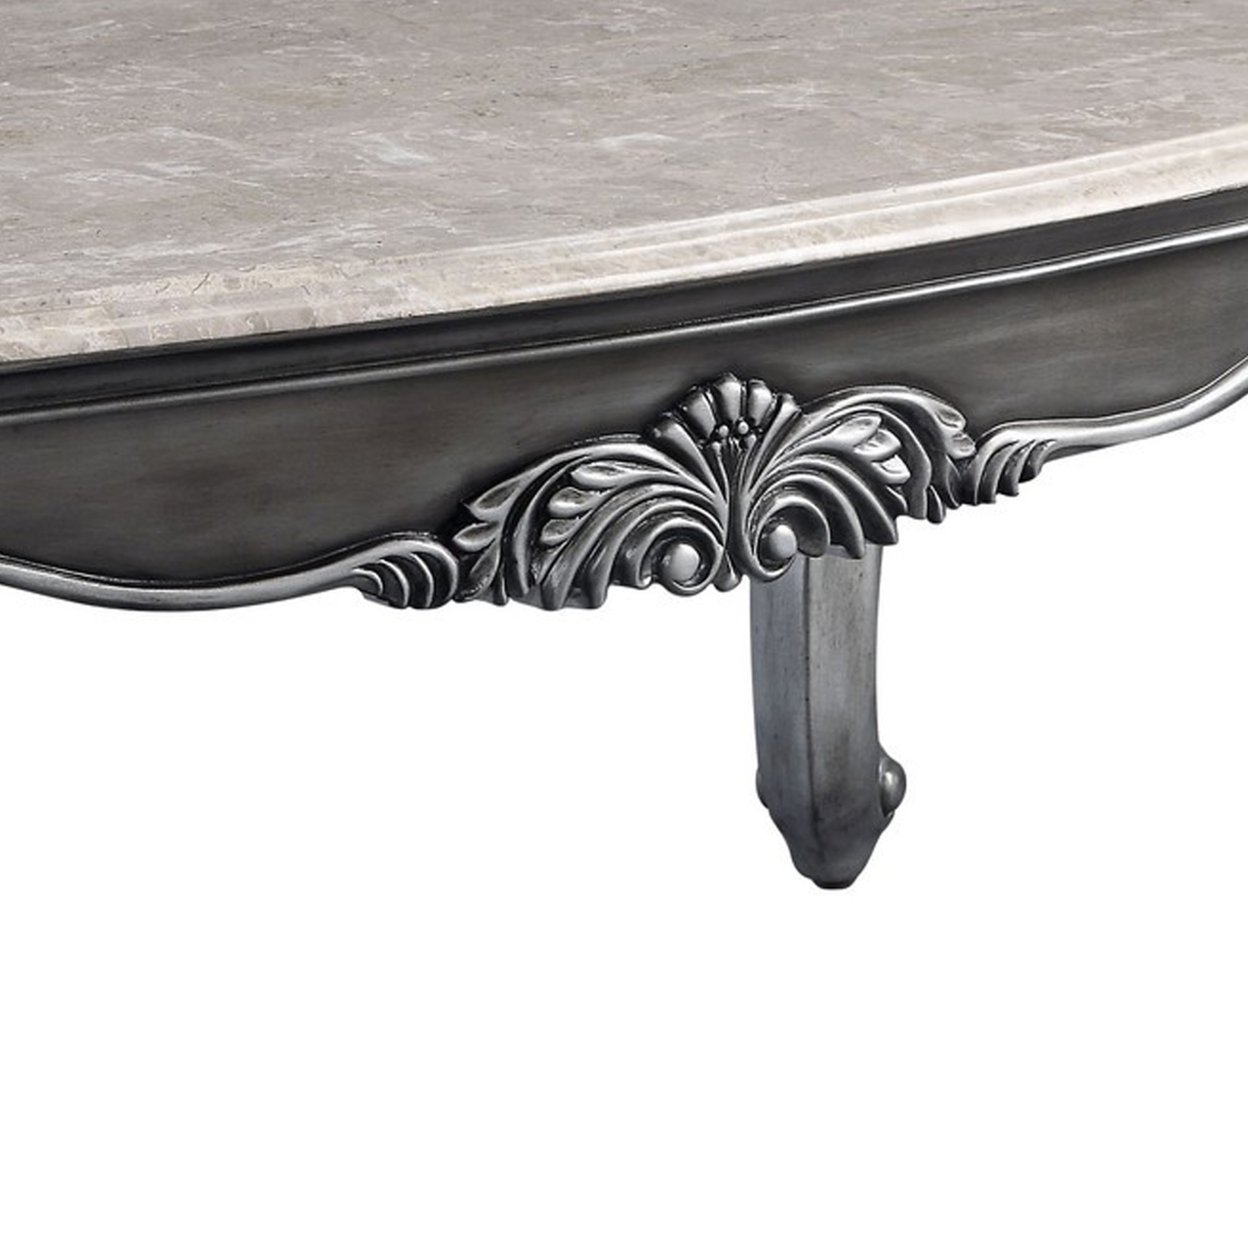 Coffee Table With Marble Top And Queen Anne Legs, Gray- Saltoro Sherpi